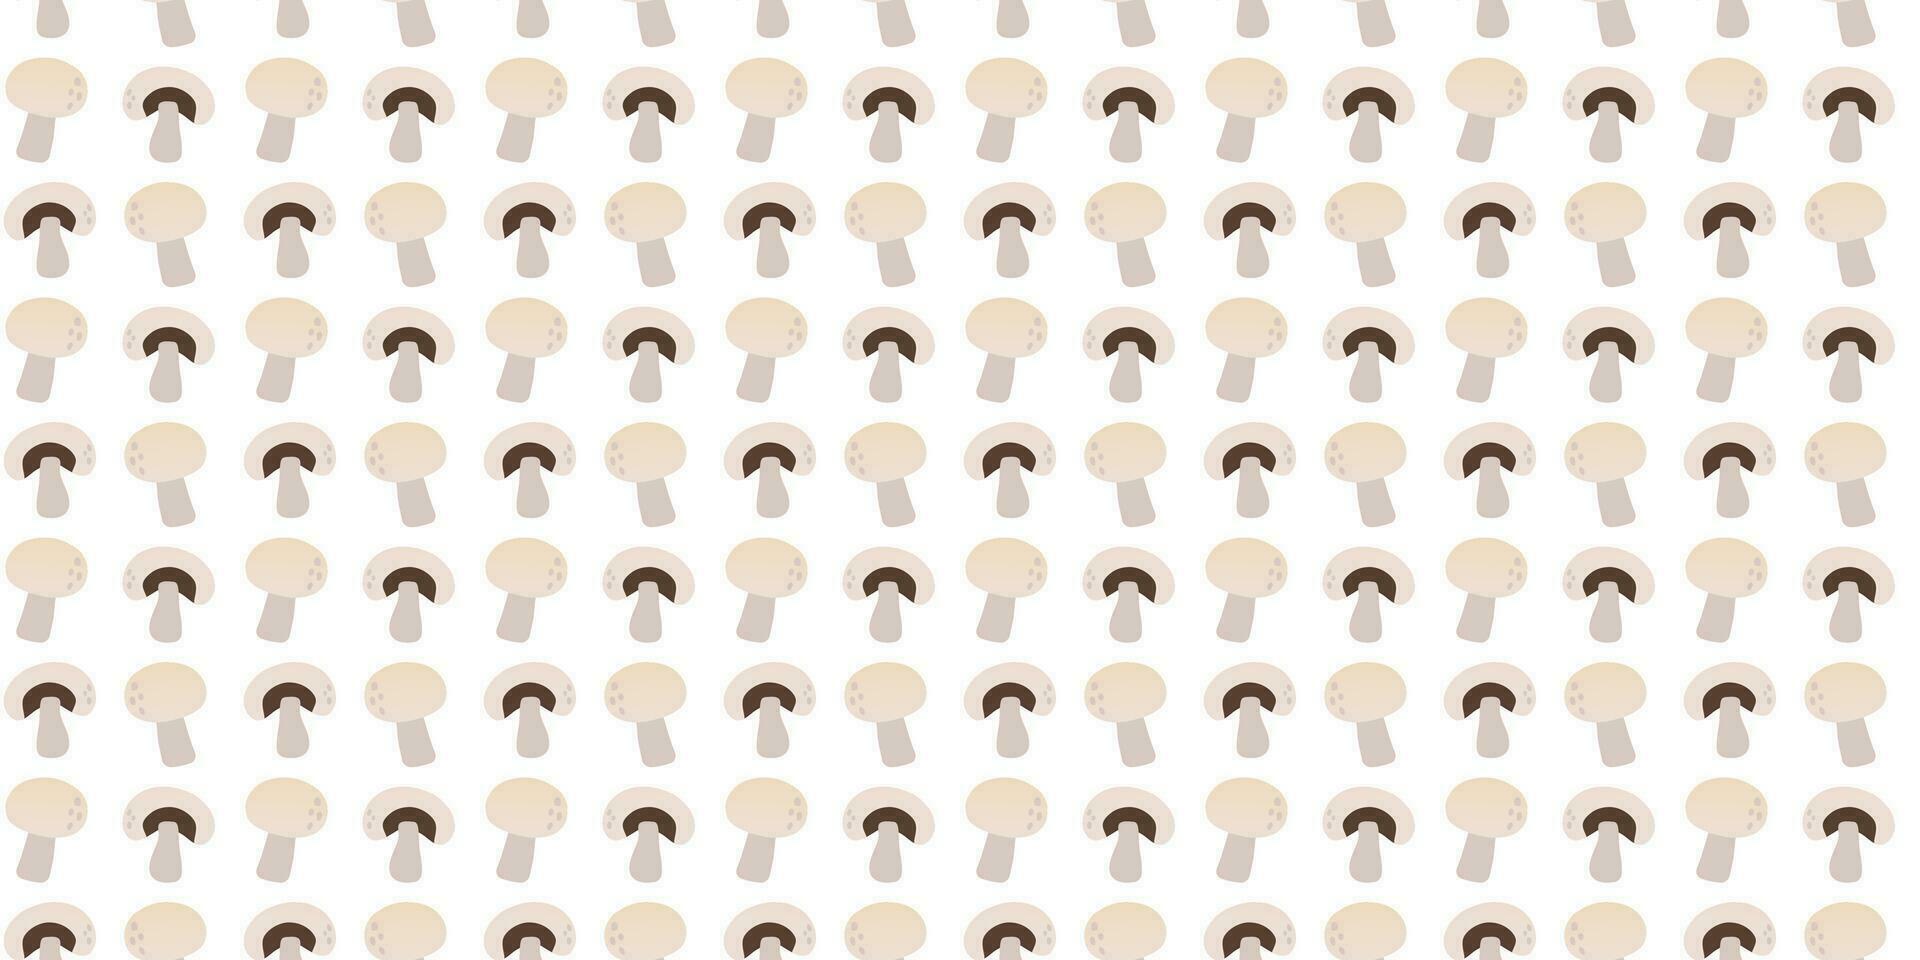 Seamless pattern white gradient mushrooms in flat vector style on white background. For print, textile, background, wrapper.